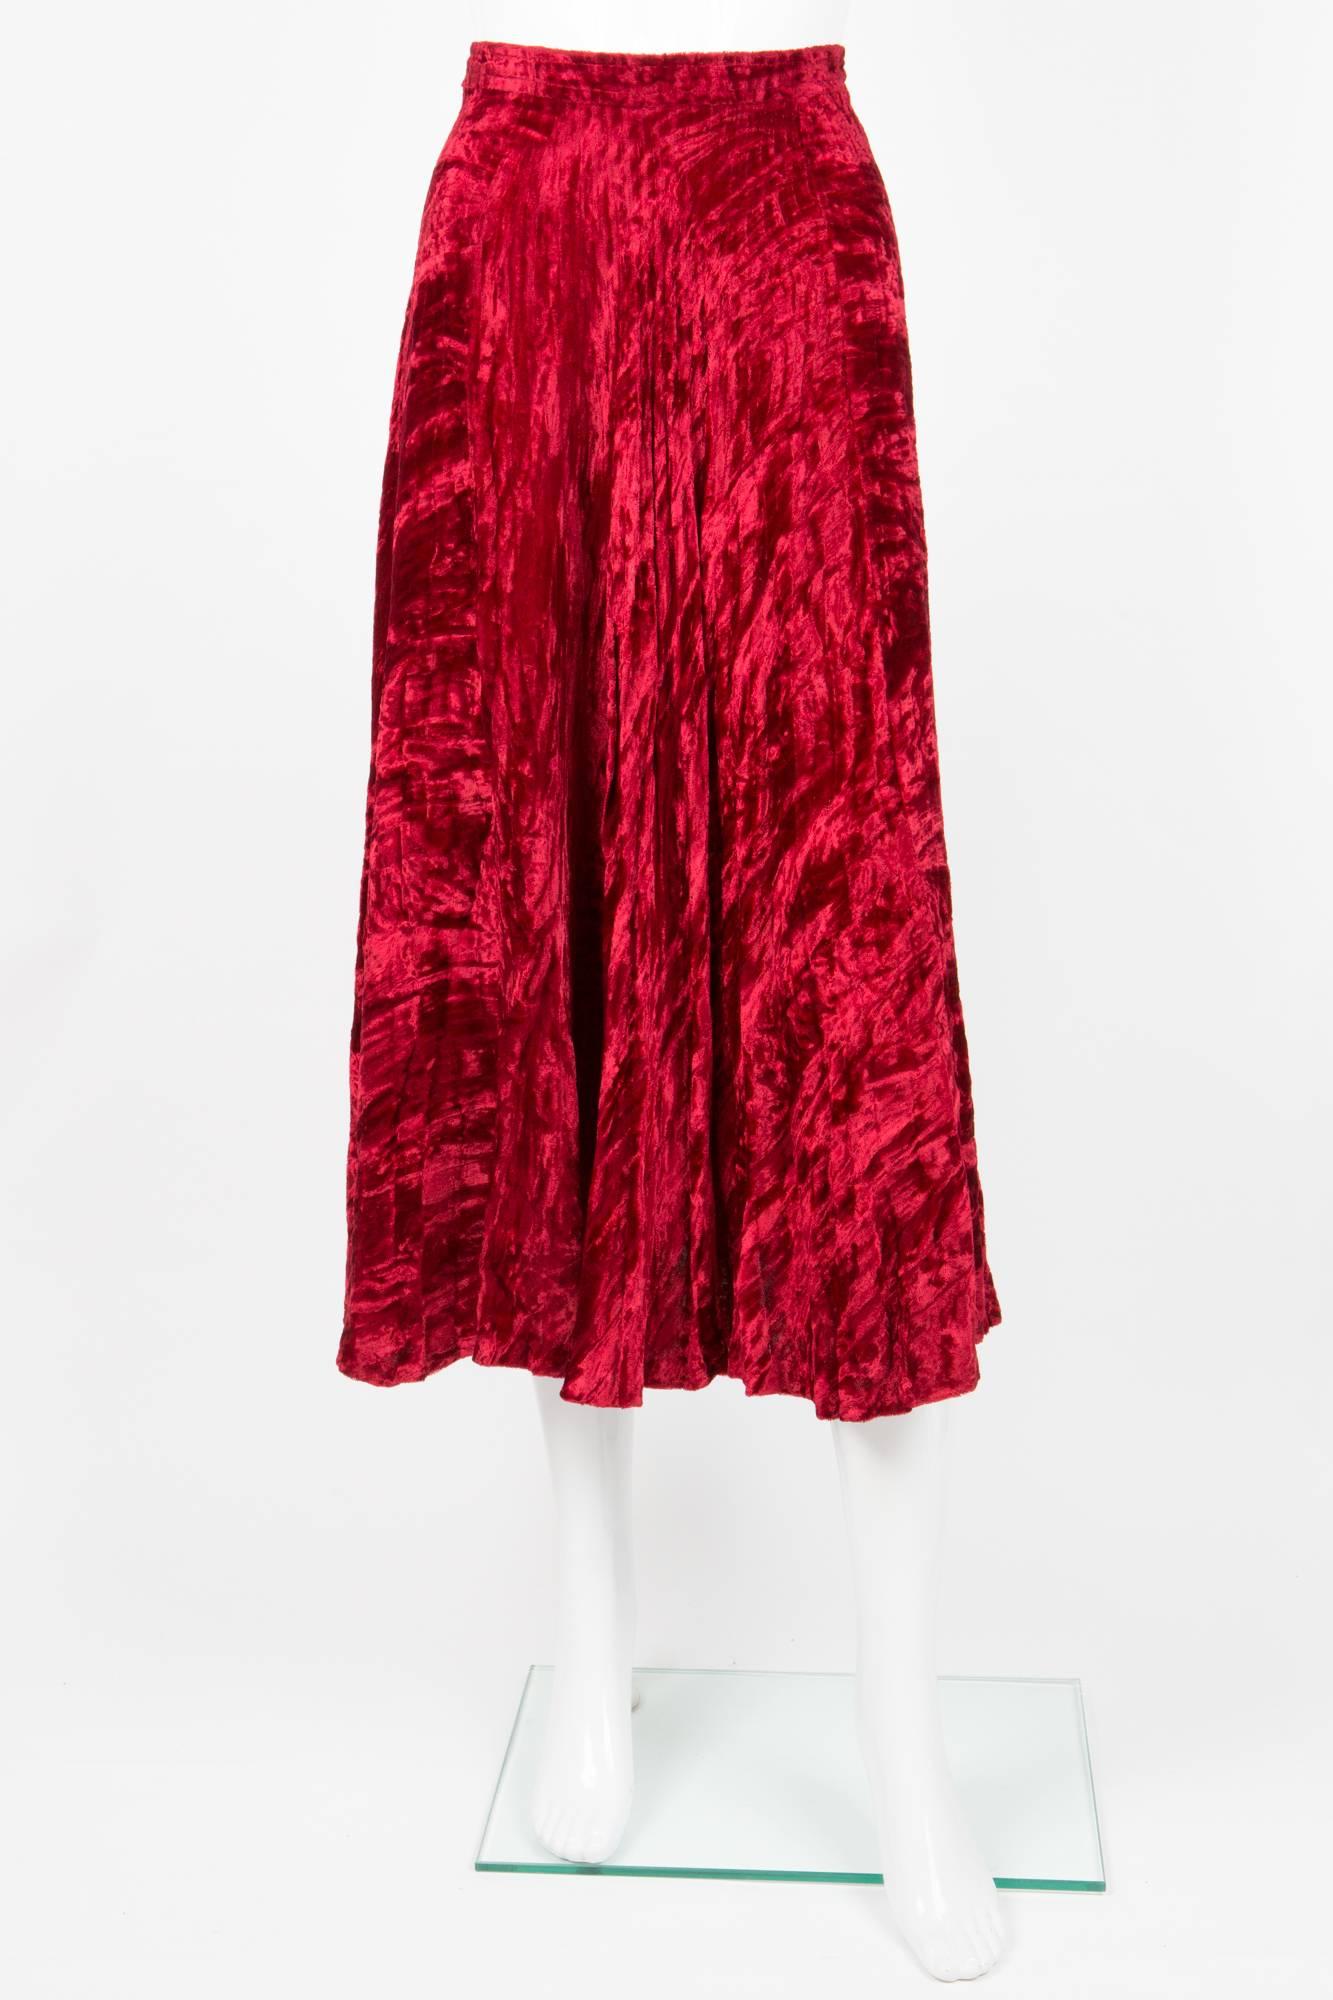 Red silk velveteen long skirt from Yves Saint Laurent Vintage featuring a high waist, a flared style and a long length.
In excellent vintage condition. Made in France.
Waist 23,6 in. ( 60 cm)
Length 31,9 in. ( 82 cm)
Estimated size:34fr (or a